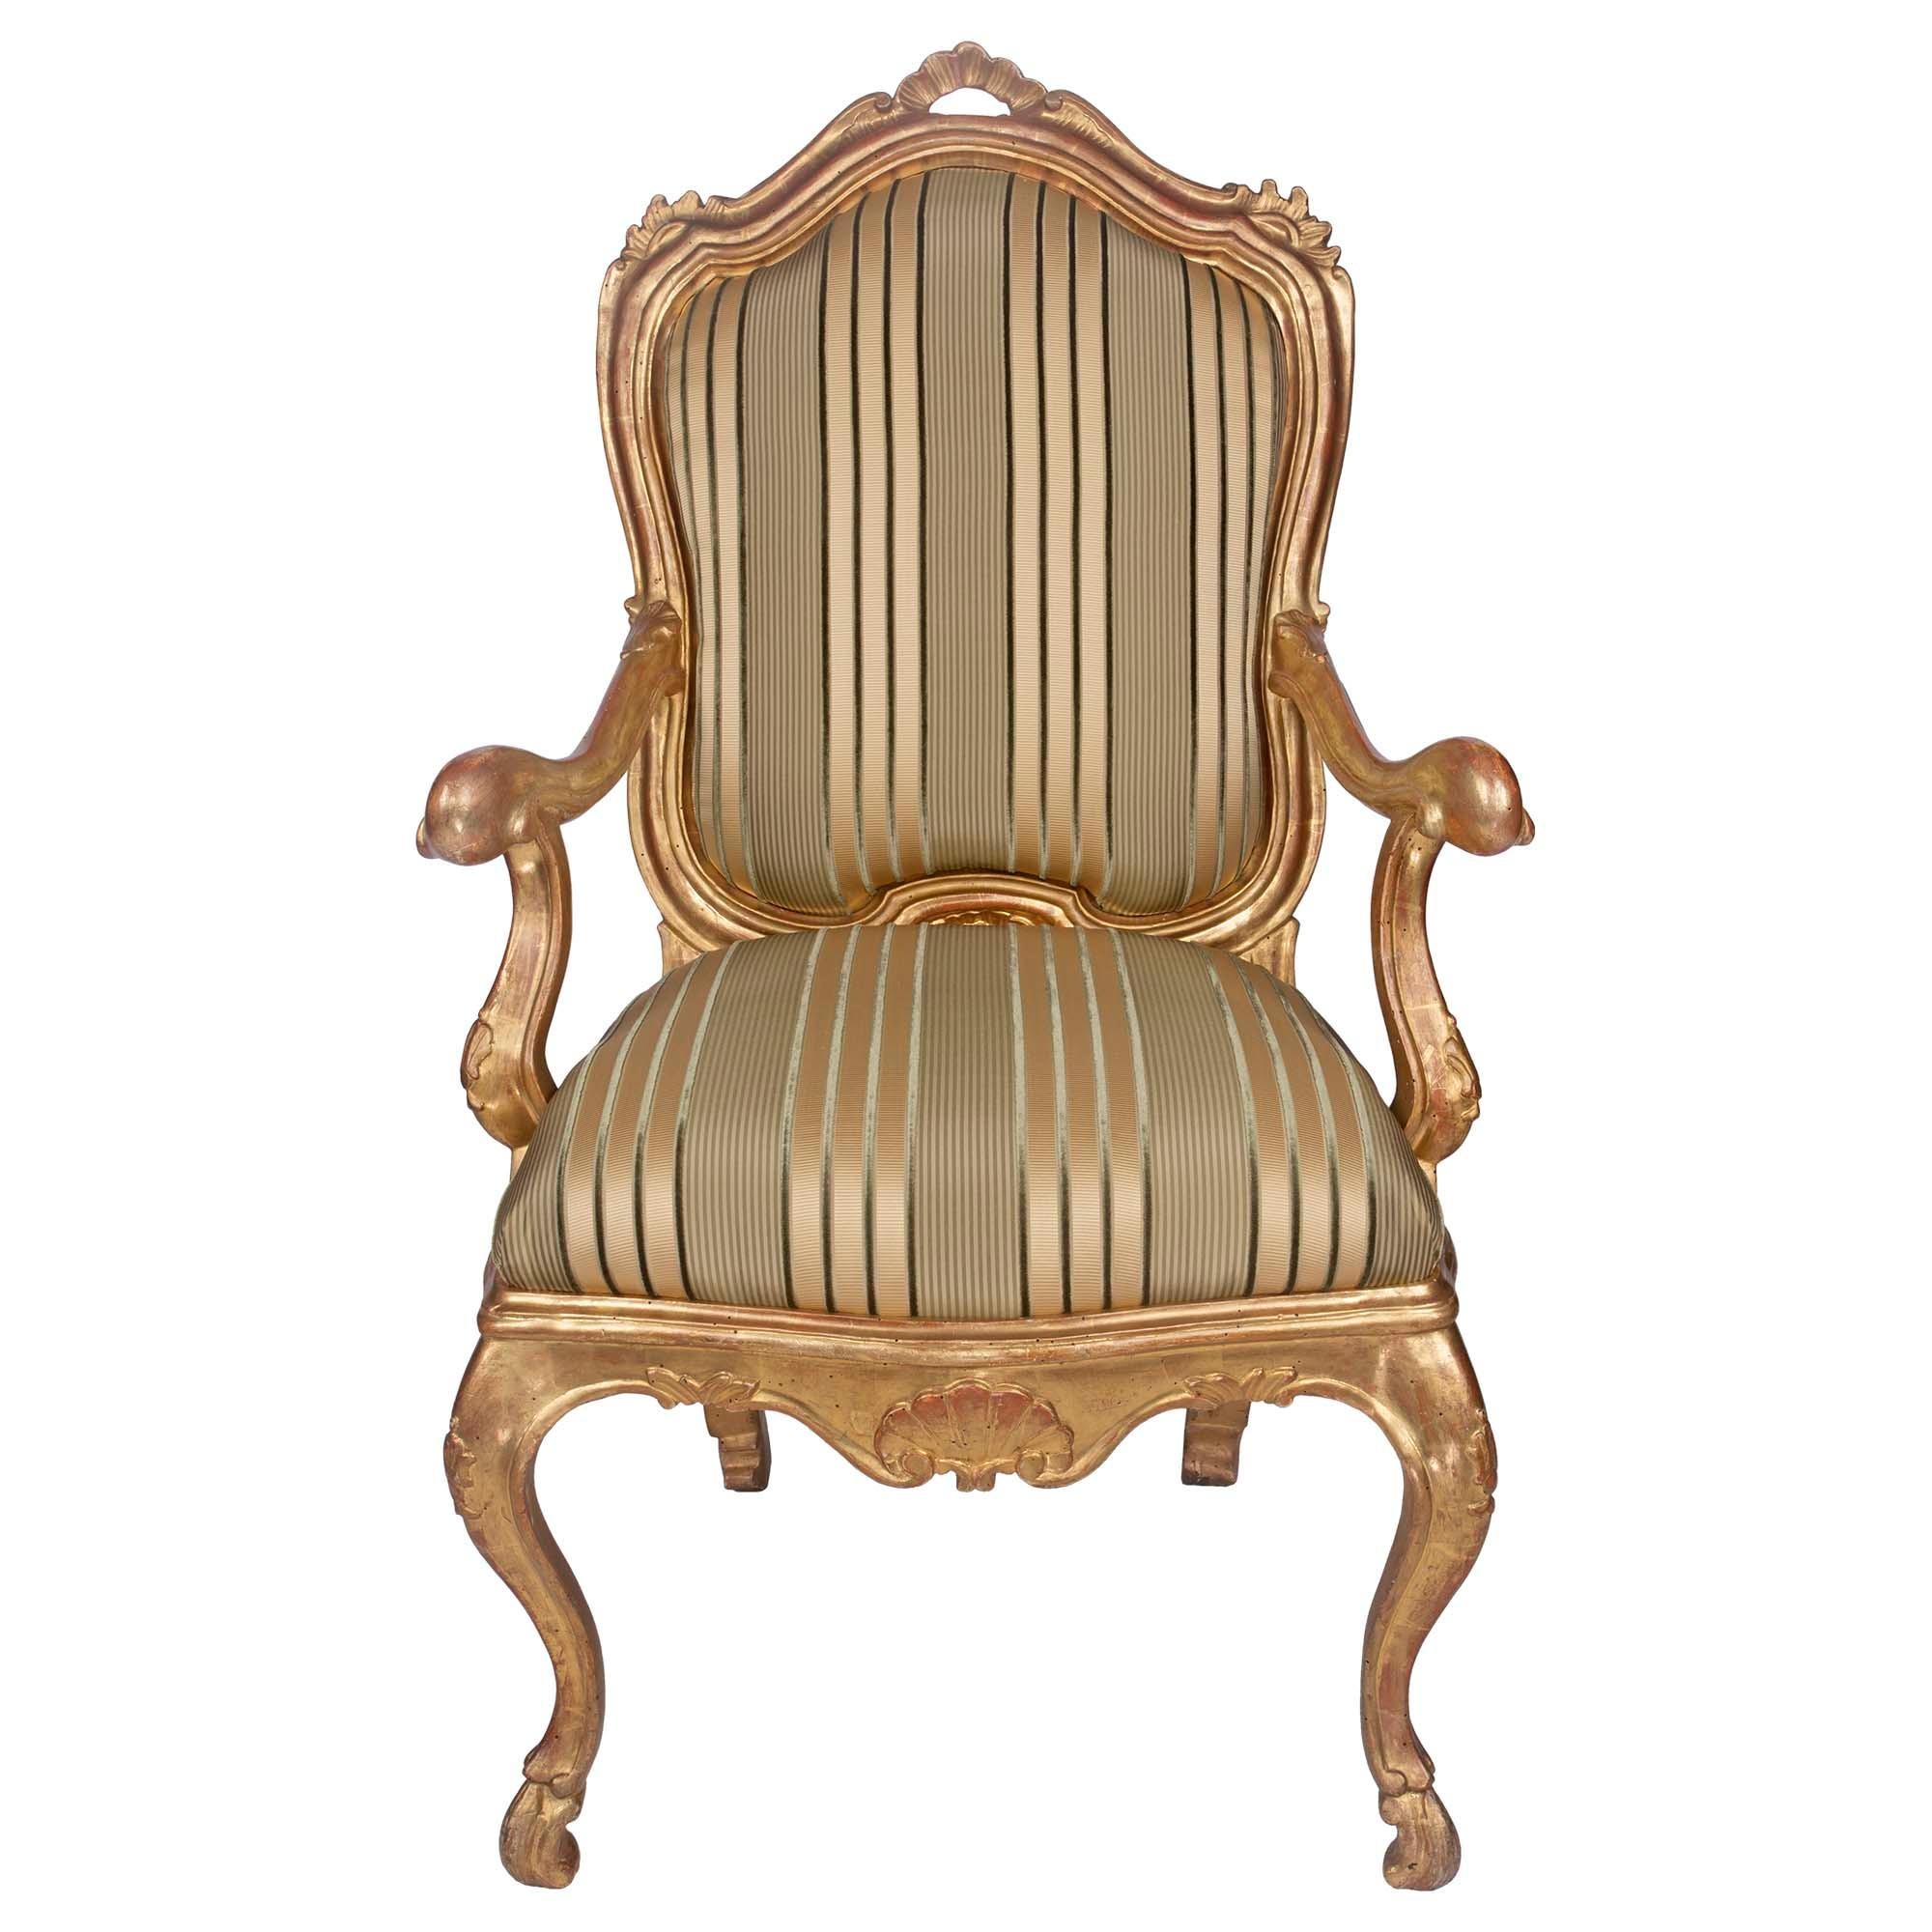 A striking pair of Italian 19th century Louis XV st. giltwood armchairs à Chassis. Each upholstered armchair, à Chassis, which signifies that the upholstery is easily removed and changed for every season, is raised by fine cabriole legs ending in